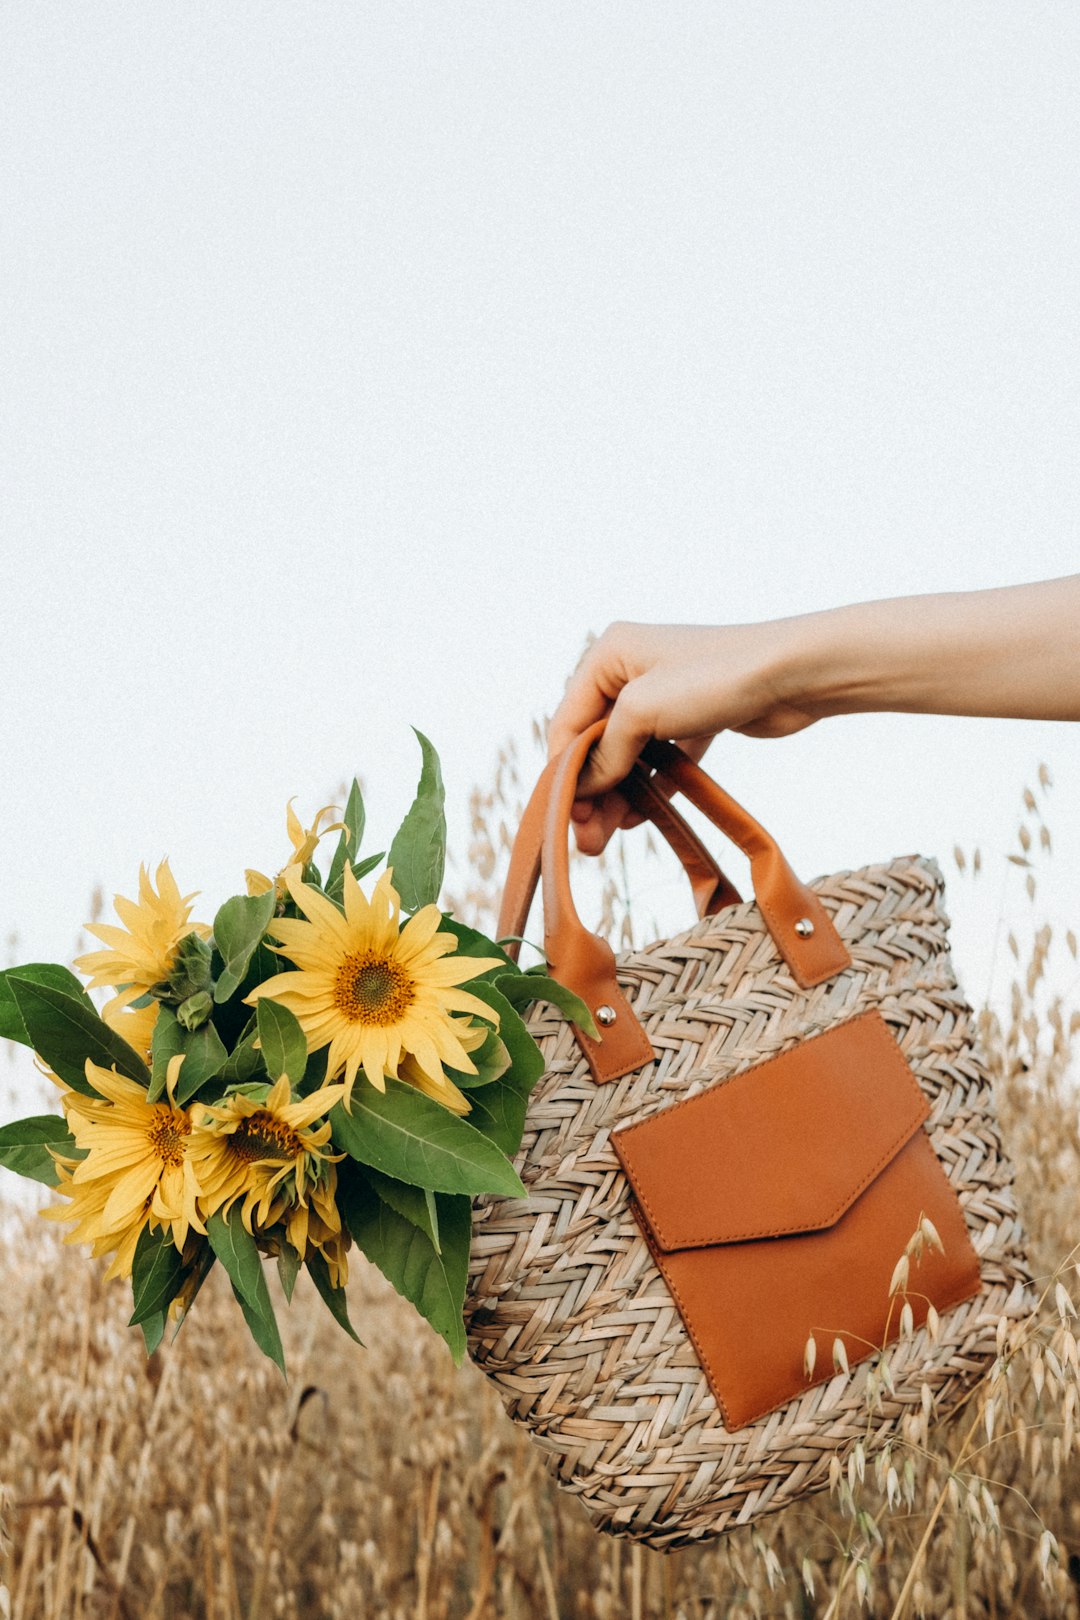 person holding brown leather handbag with yellow sunflower